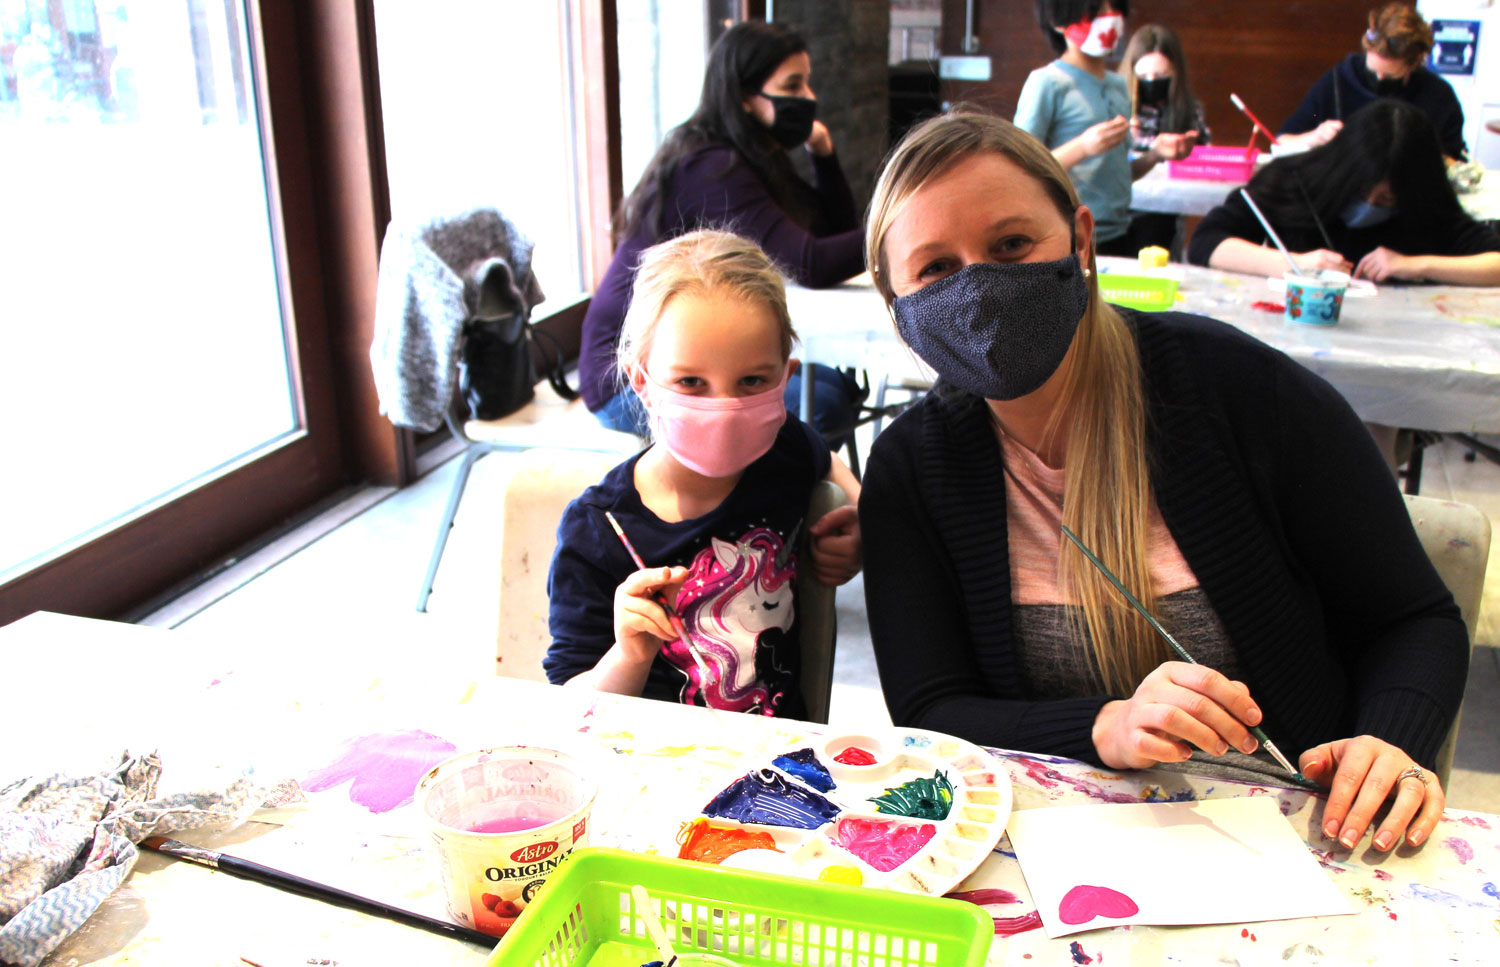 Mother and daughter creating artwork in family workshop